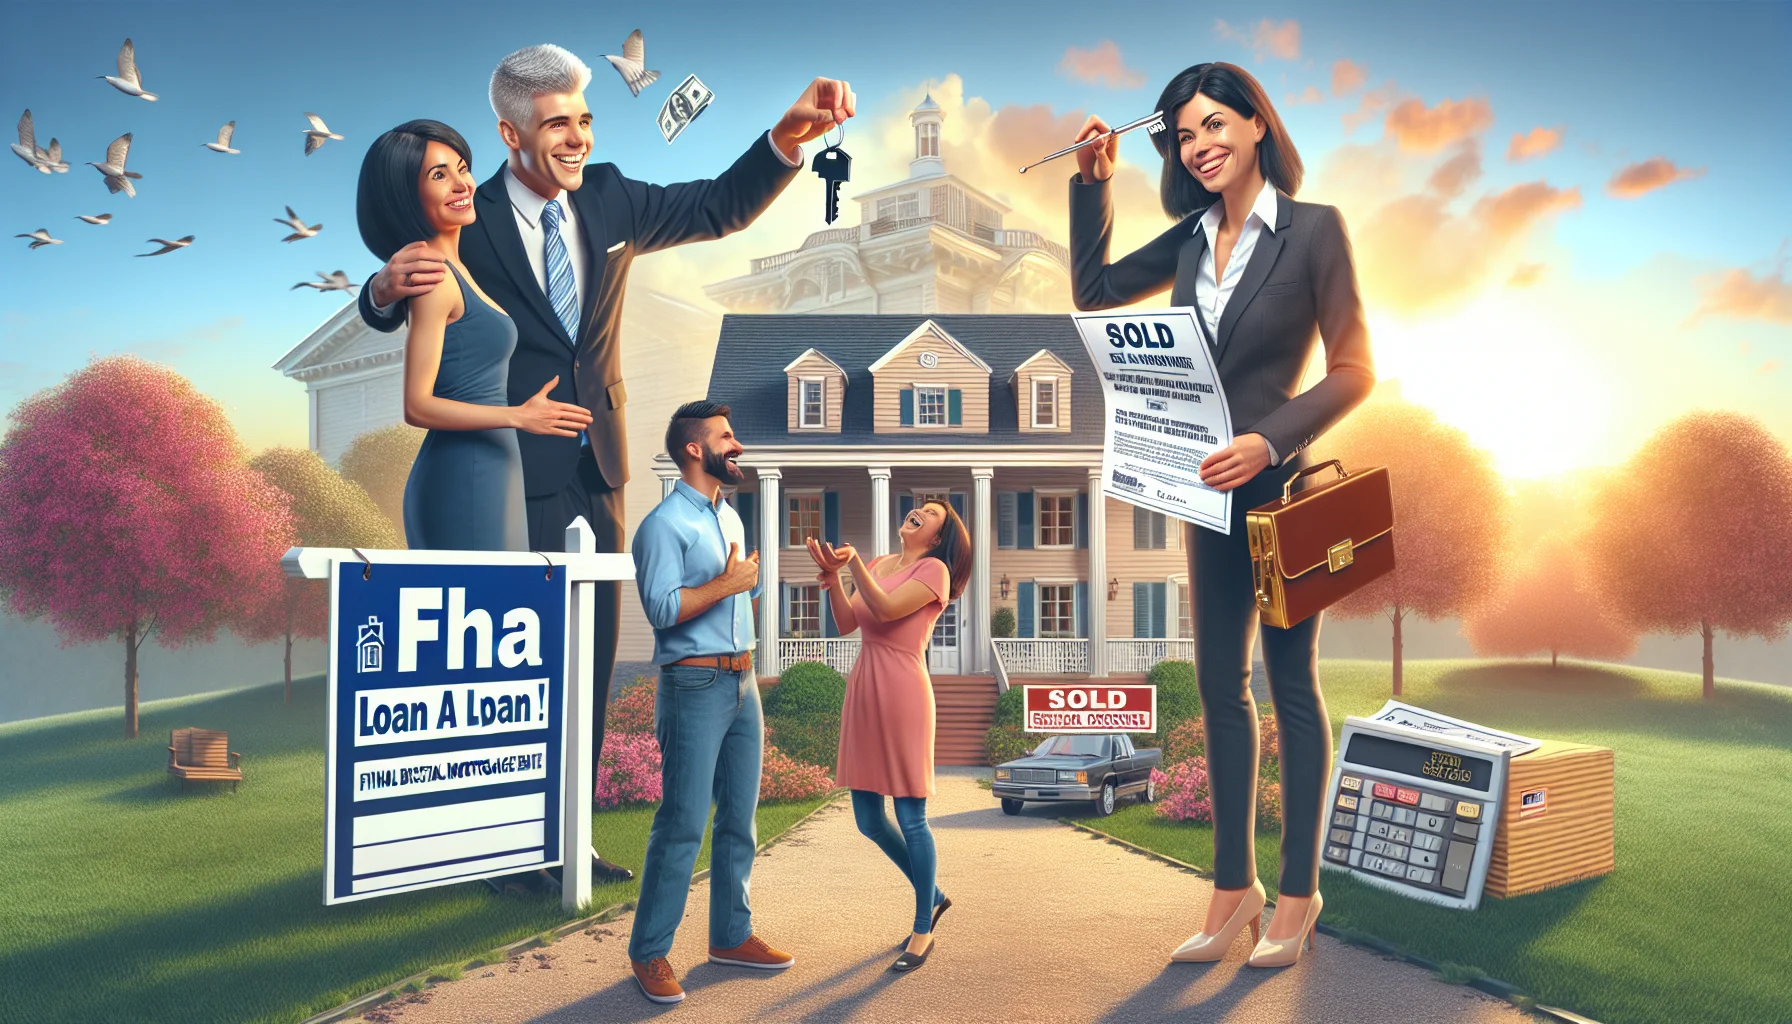 A humorously idealistic vision of real estate in Virginia involving FHA Loans. A confident, joyful realtor of Caucasian descent handing over the house keys to an ecstatic Hispanic couple against the backdrop of a majestic, newly purchased colonial-style house bathed in morning sunlight. Surrounding the scene are indicative symbols such as a miniature 'sold' sign, a document titled 'FHA Loan Approval', and a calculator showing an incredible final mortgage rate. All depict the perfect and absolute best-case scenario of acquiring a property with an FHA loan in Virginia.